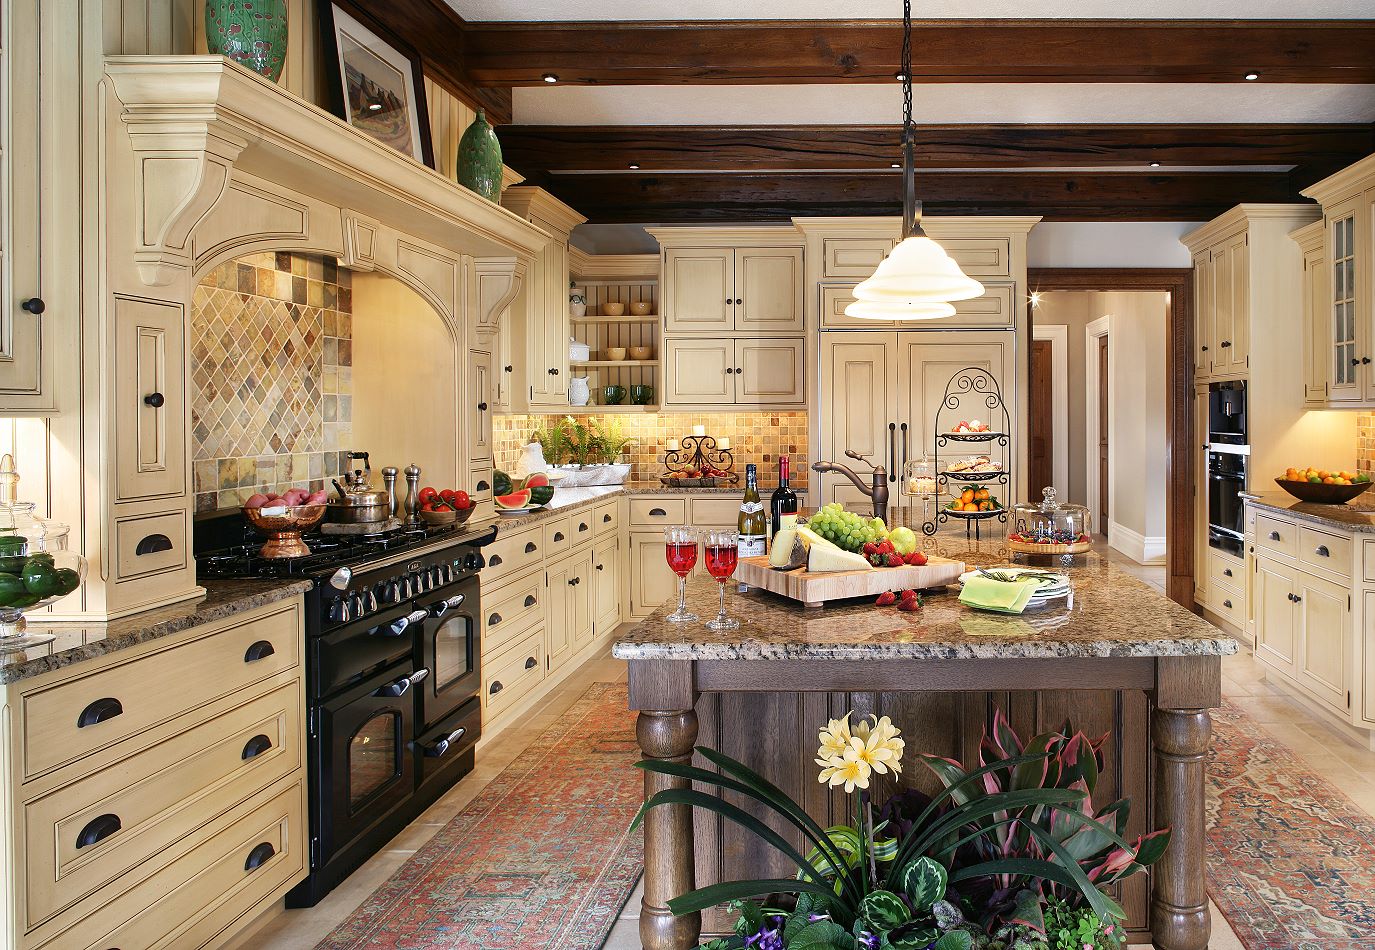 Traditional kitchen ideas: 20 classic, characterful looks